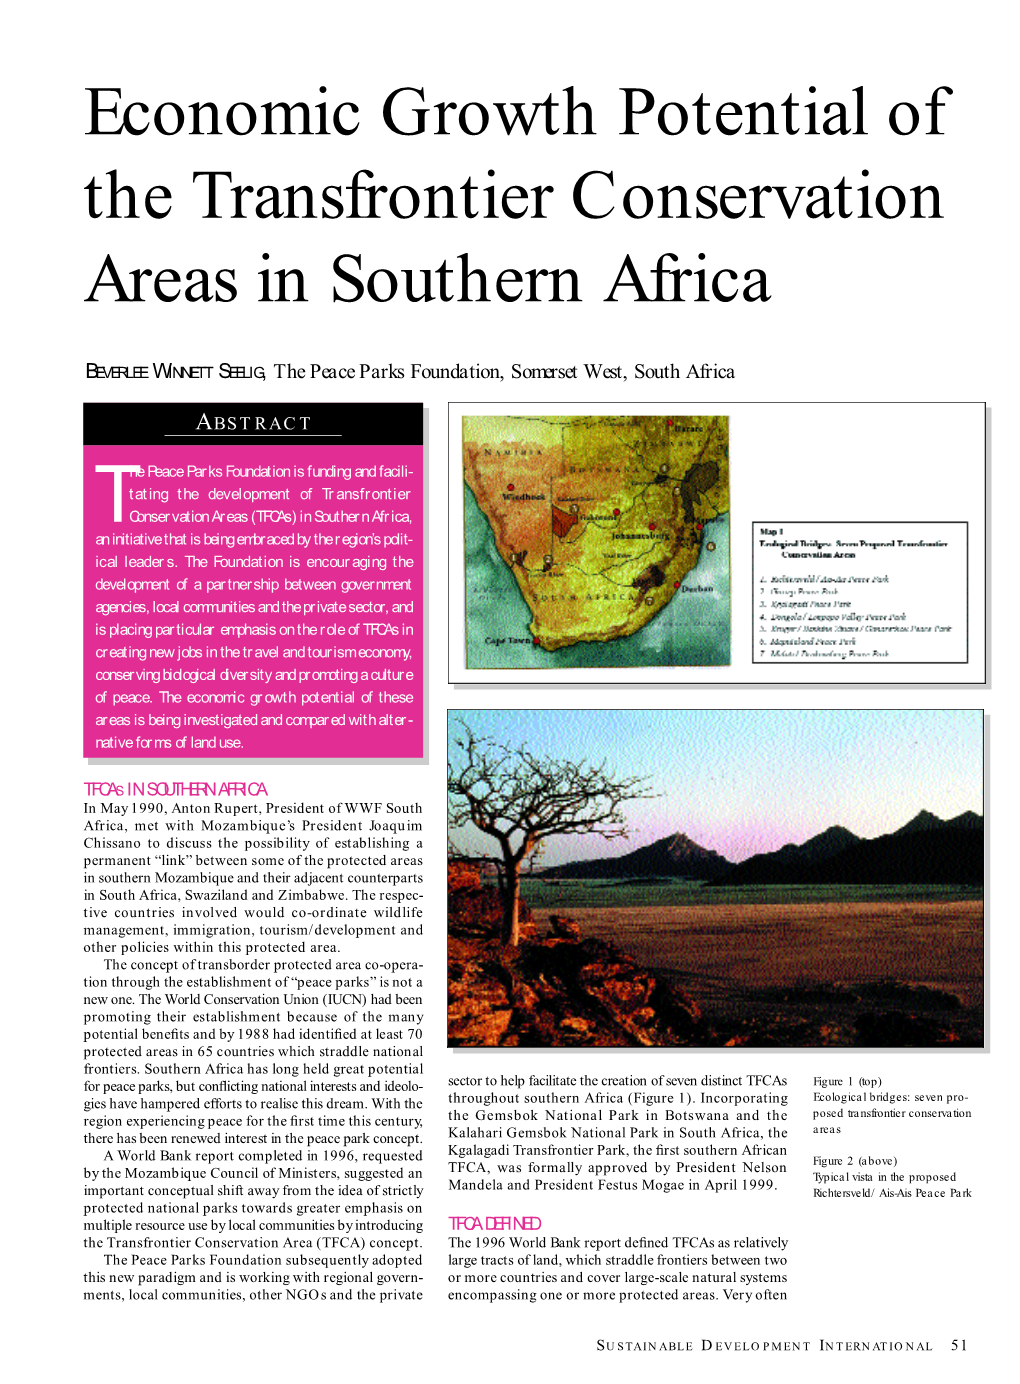 Economic Growth Potential of the Transfrontier Conservation Areas in Southern Africa